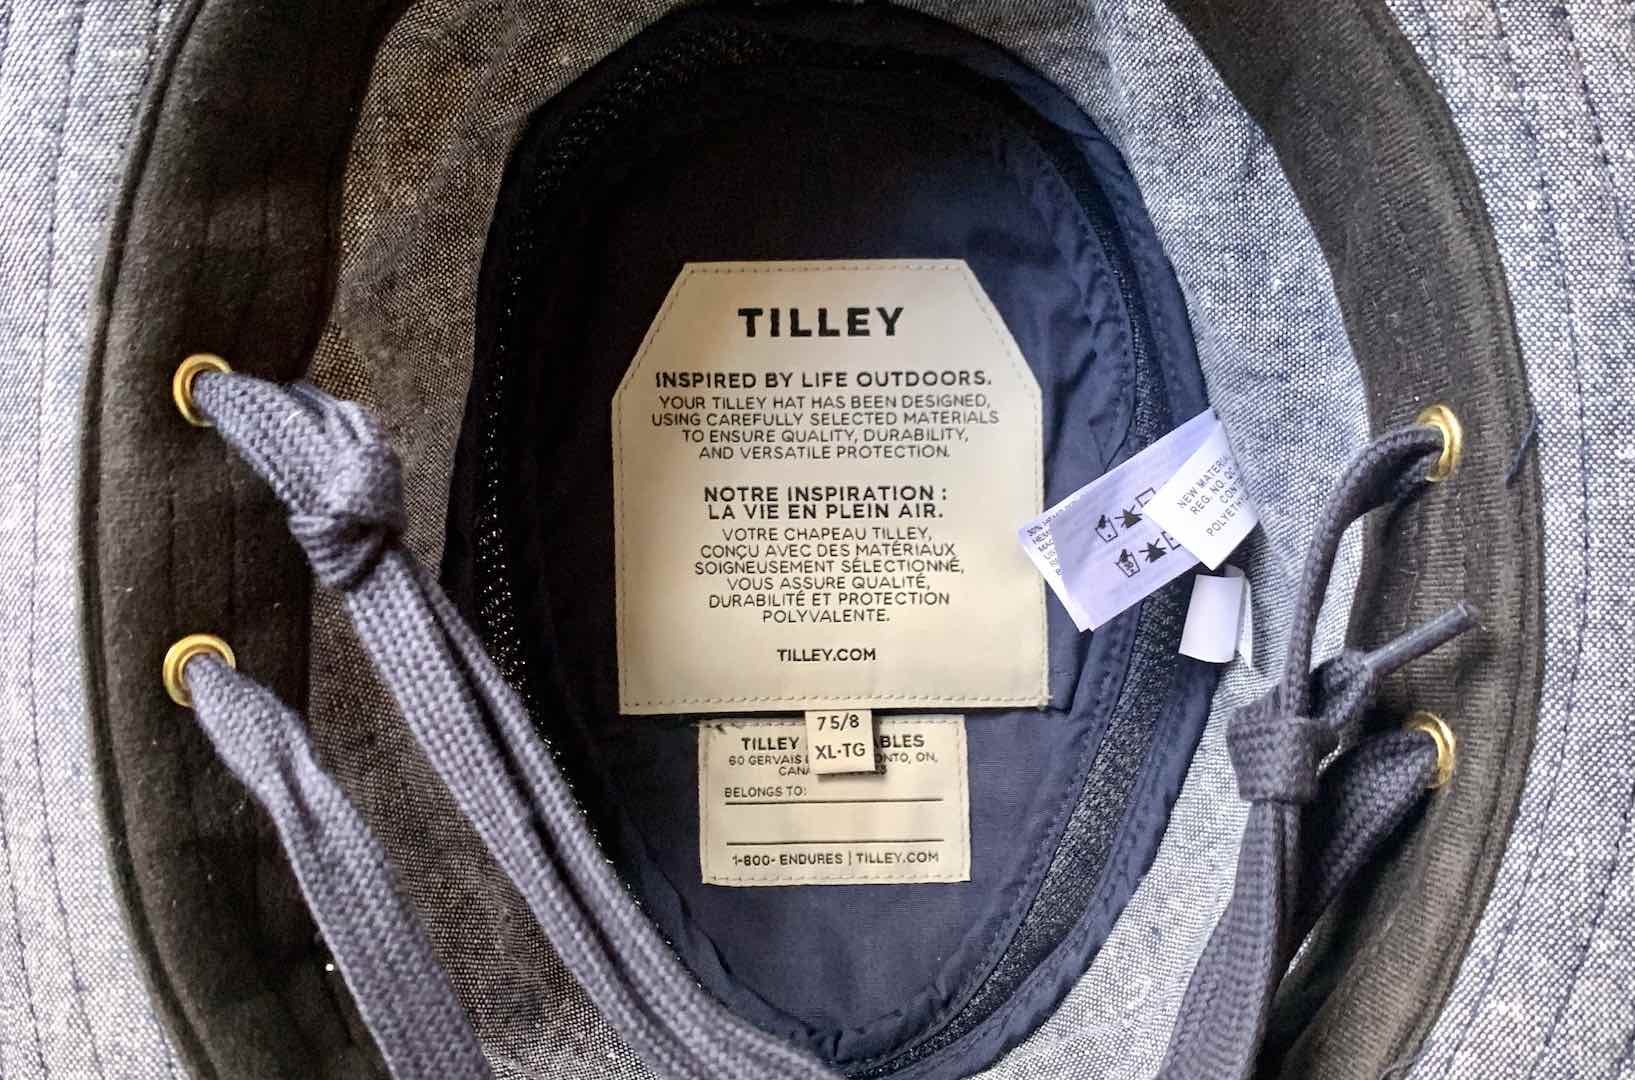 Tilley makes top notch hats with lifetime warranties and quality materials. If you're hunting for sun protection, check them out!